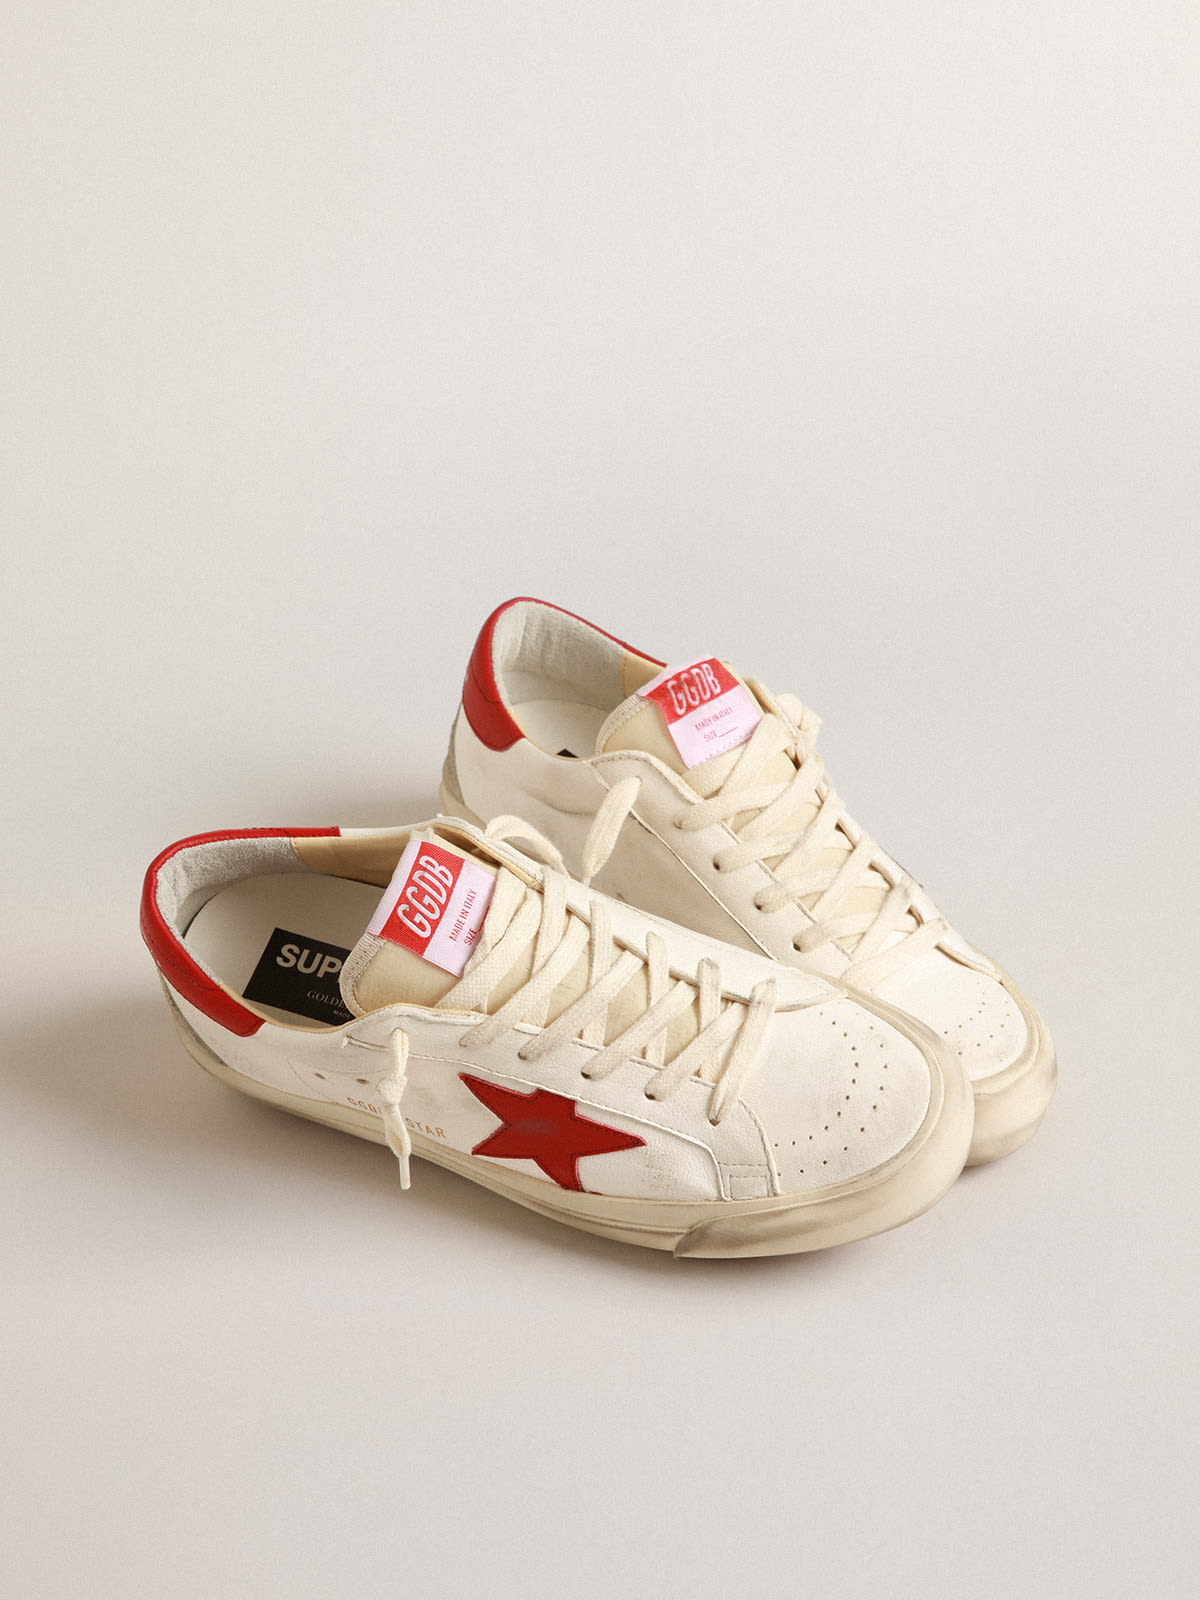 Golden Goose - Men’s Super-Star LTD in nappa leather with red star and heel tab in 